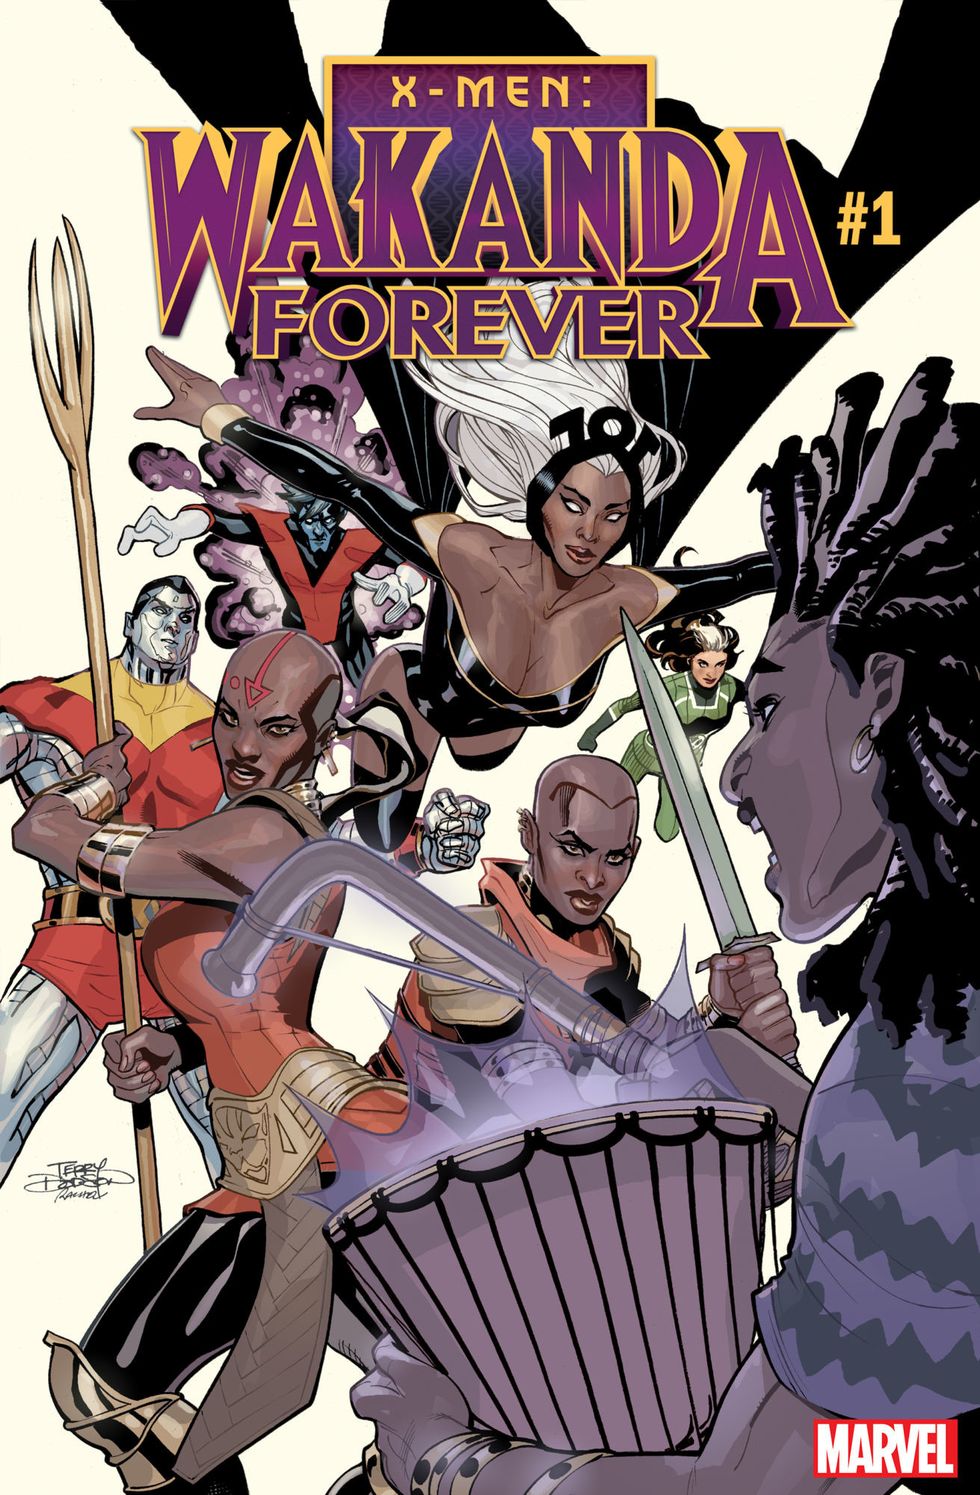 The Dora Milaje Link Up with Storm In the Second Issue of Their Spin-Off Penned by Nnedi Okorafor